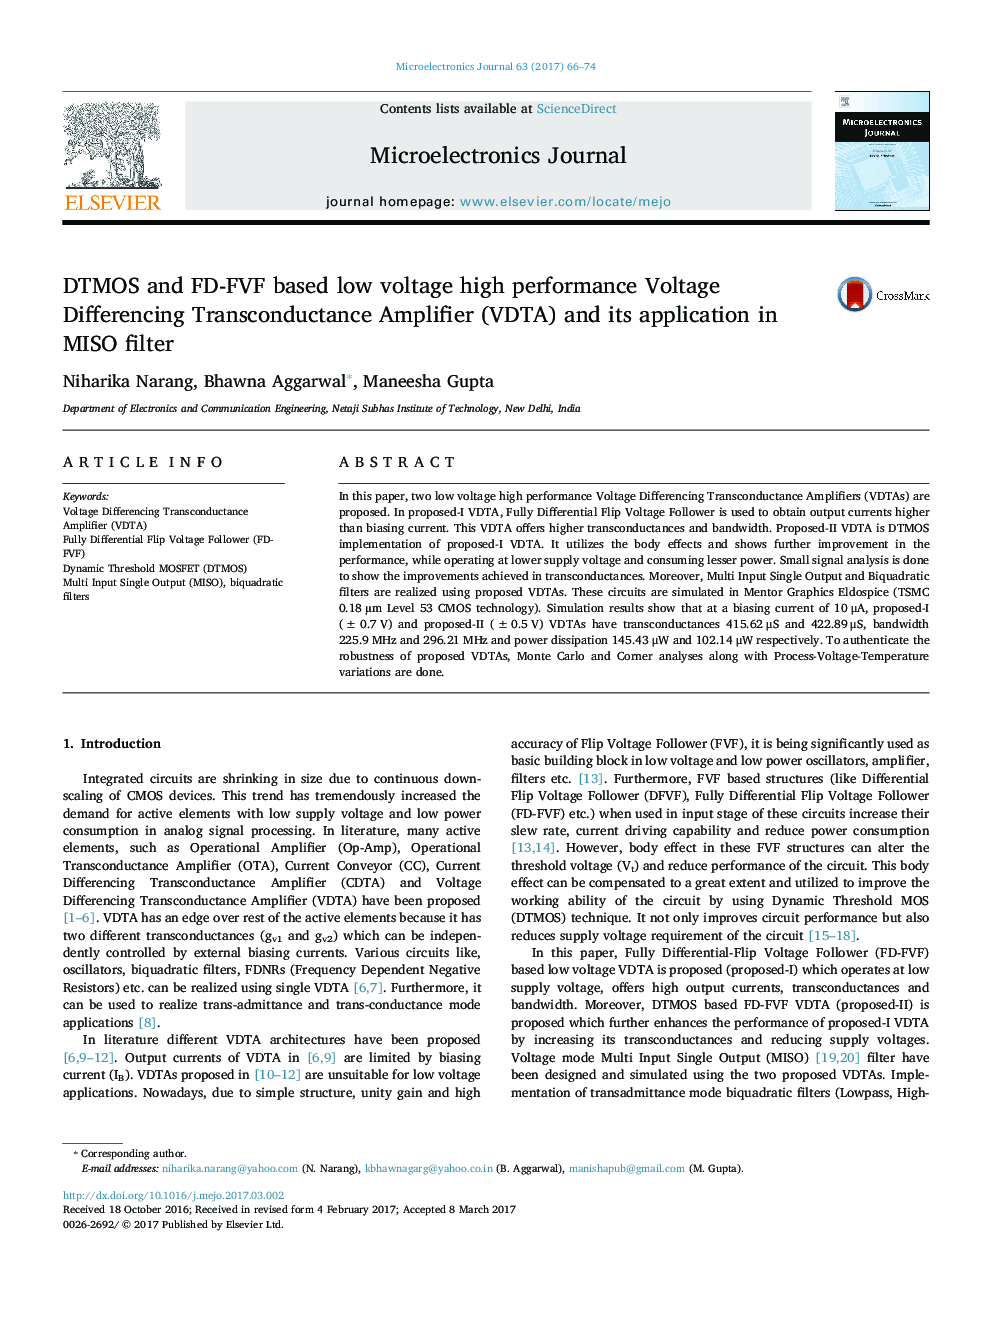 DTMOS and FD-FVF based low voltage high performance Voltage Differencing Transconductance Amplifier (VDTA) and its application in MISO filter